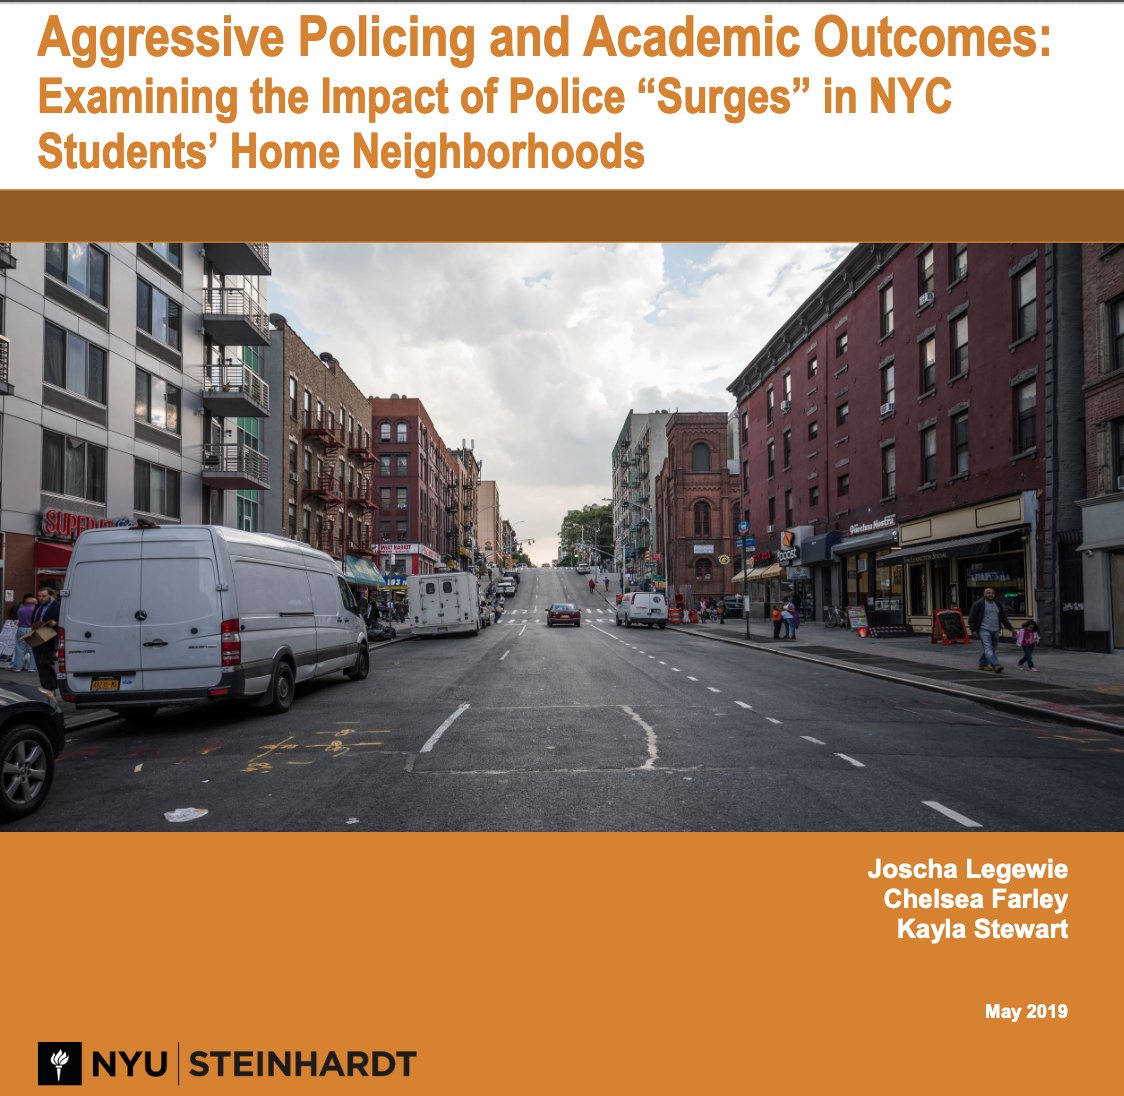 467/ "Operation Impact...quickly increased the number of police officers in specific high-crime areas designated as 'impact zones'" Found significant negative impact of these policies on standardized test scores of black youth in affected areas.